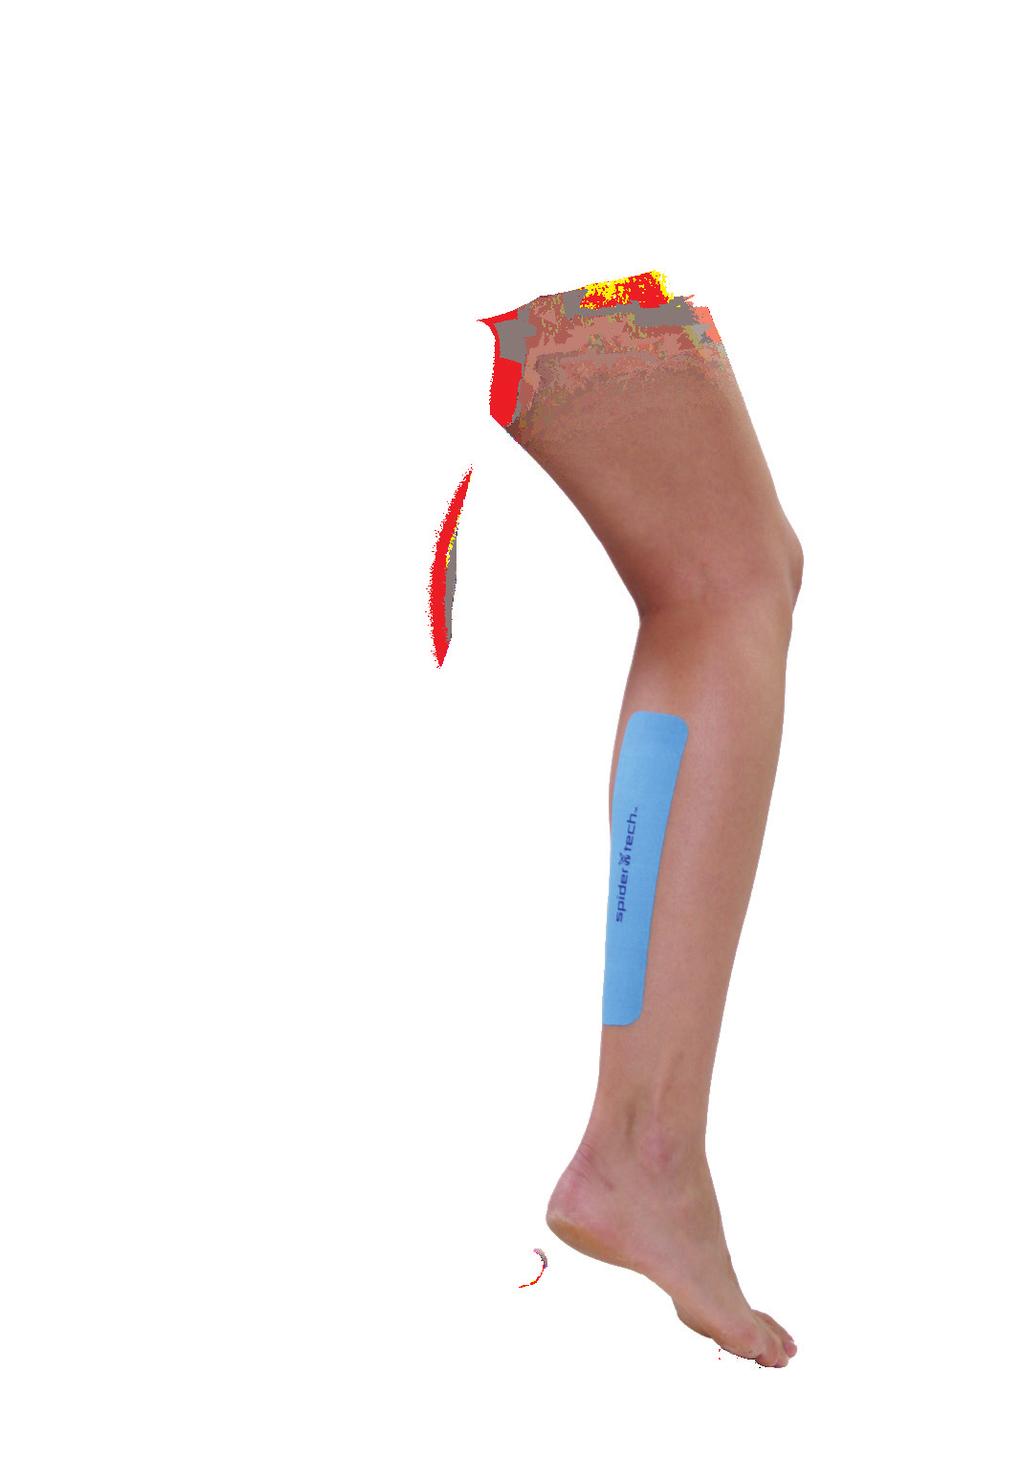 CALF The Calf Tennis Application is designed to improve your balance, stability and ankle motion.